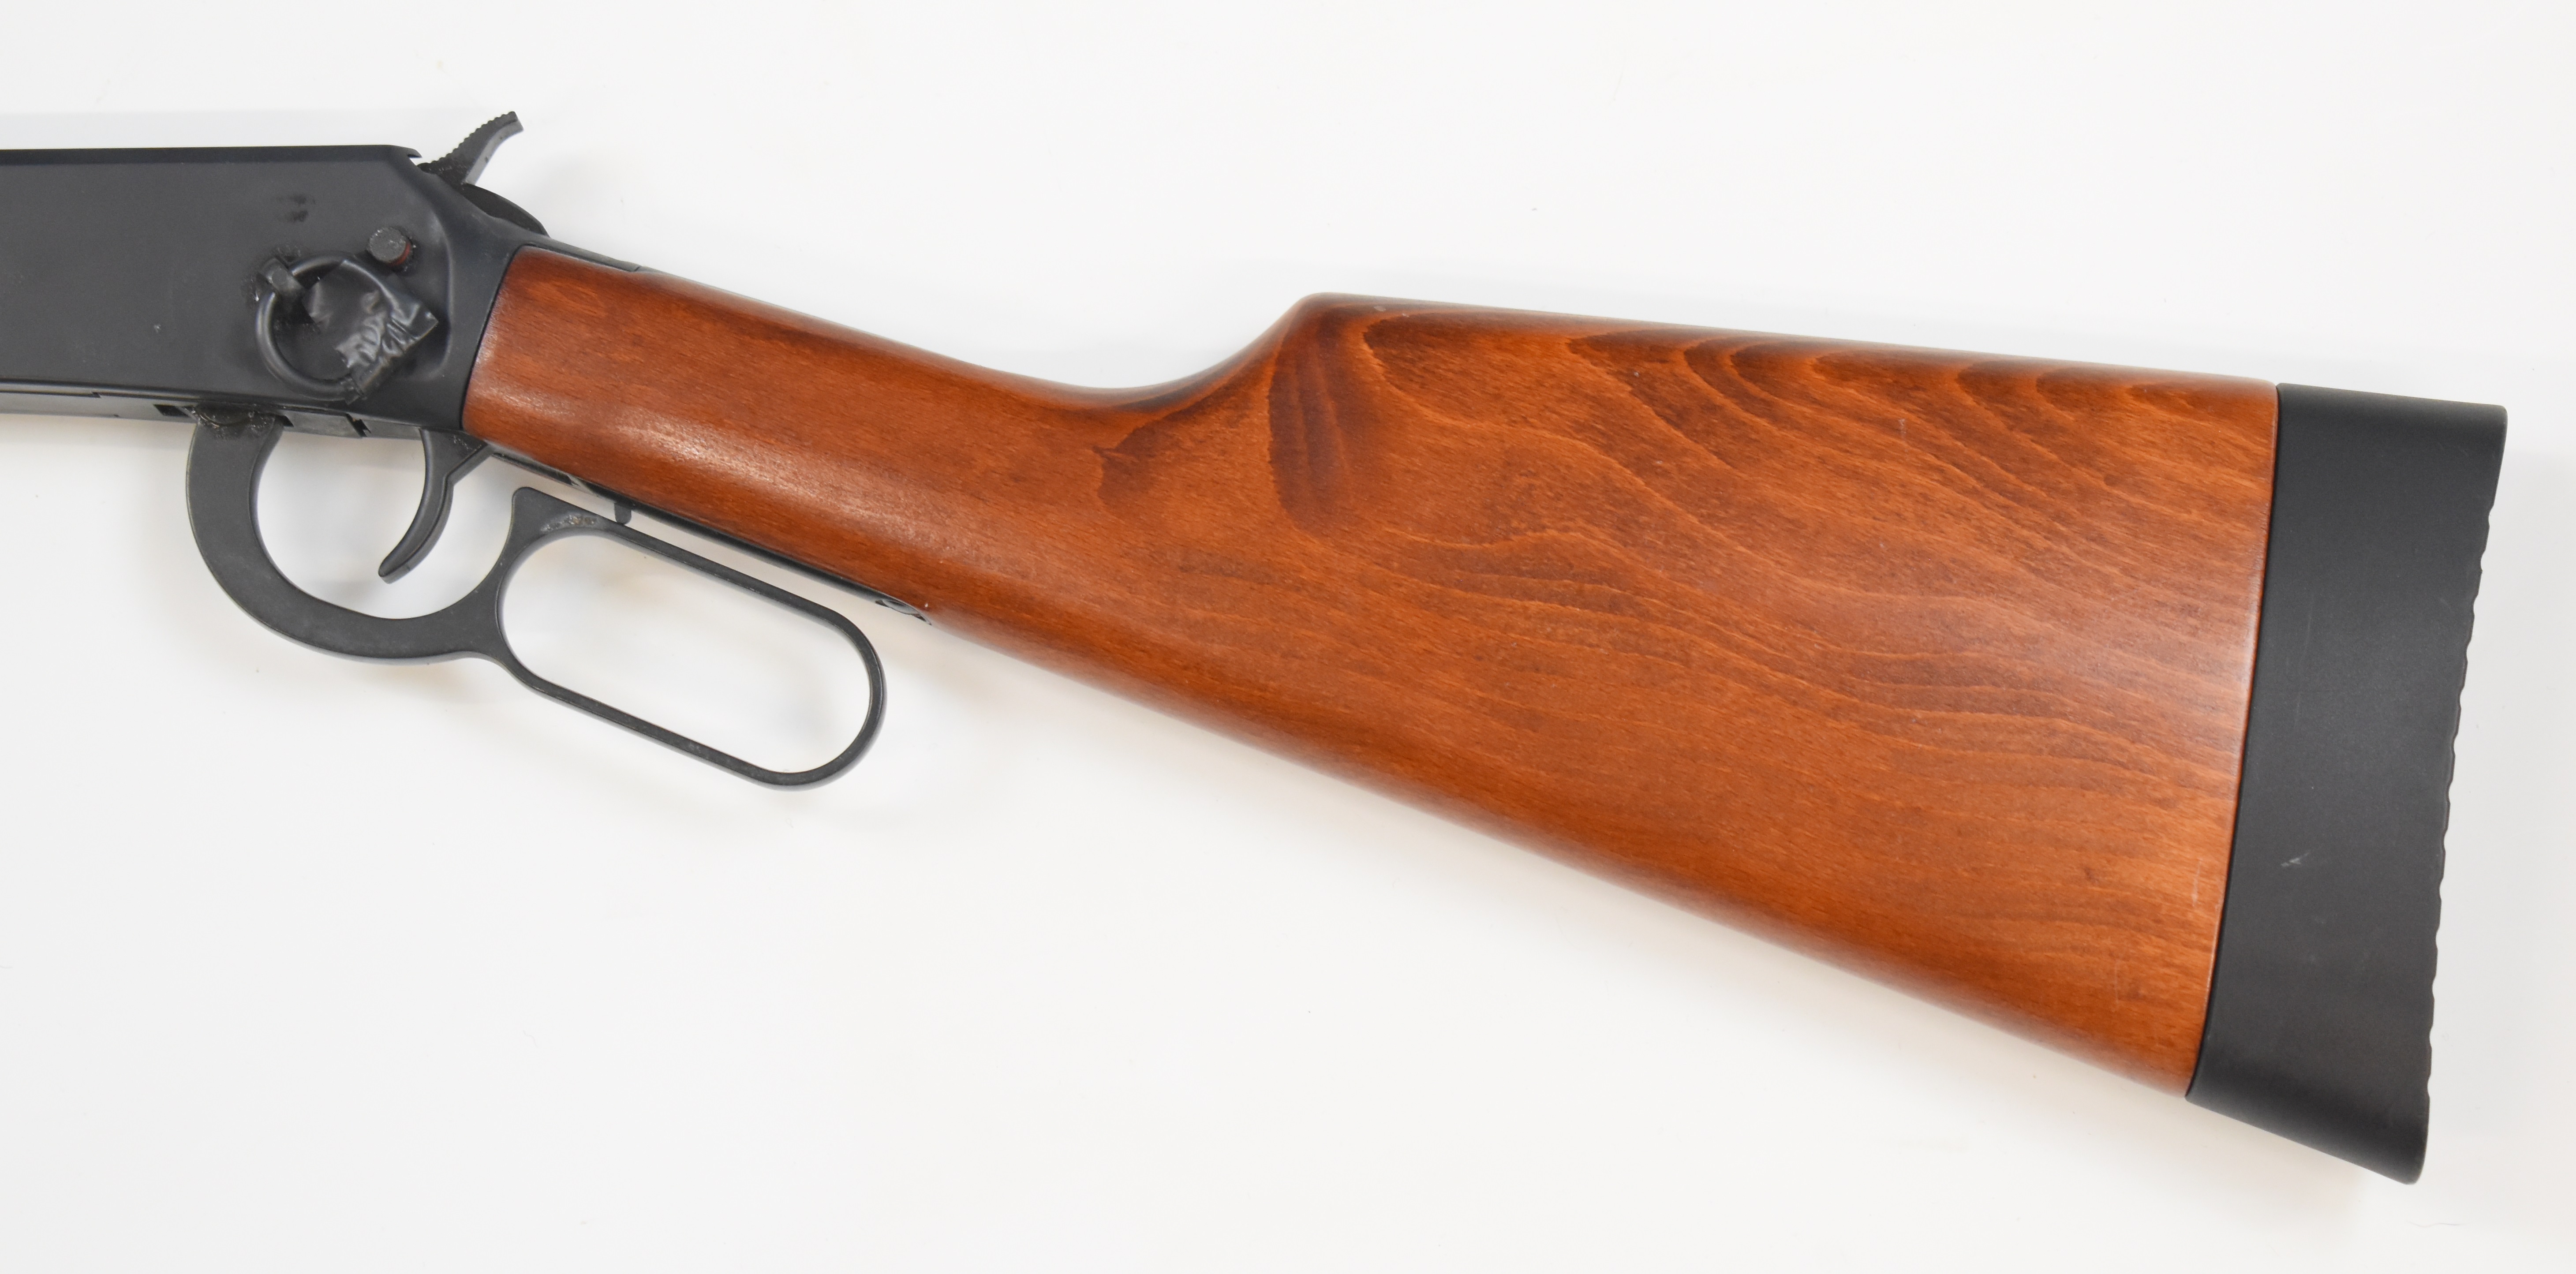 Walther Winchester style lever-action .177 CO2 carbine air rifle with two 8 shot magazines, - Image 7 of 11